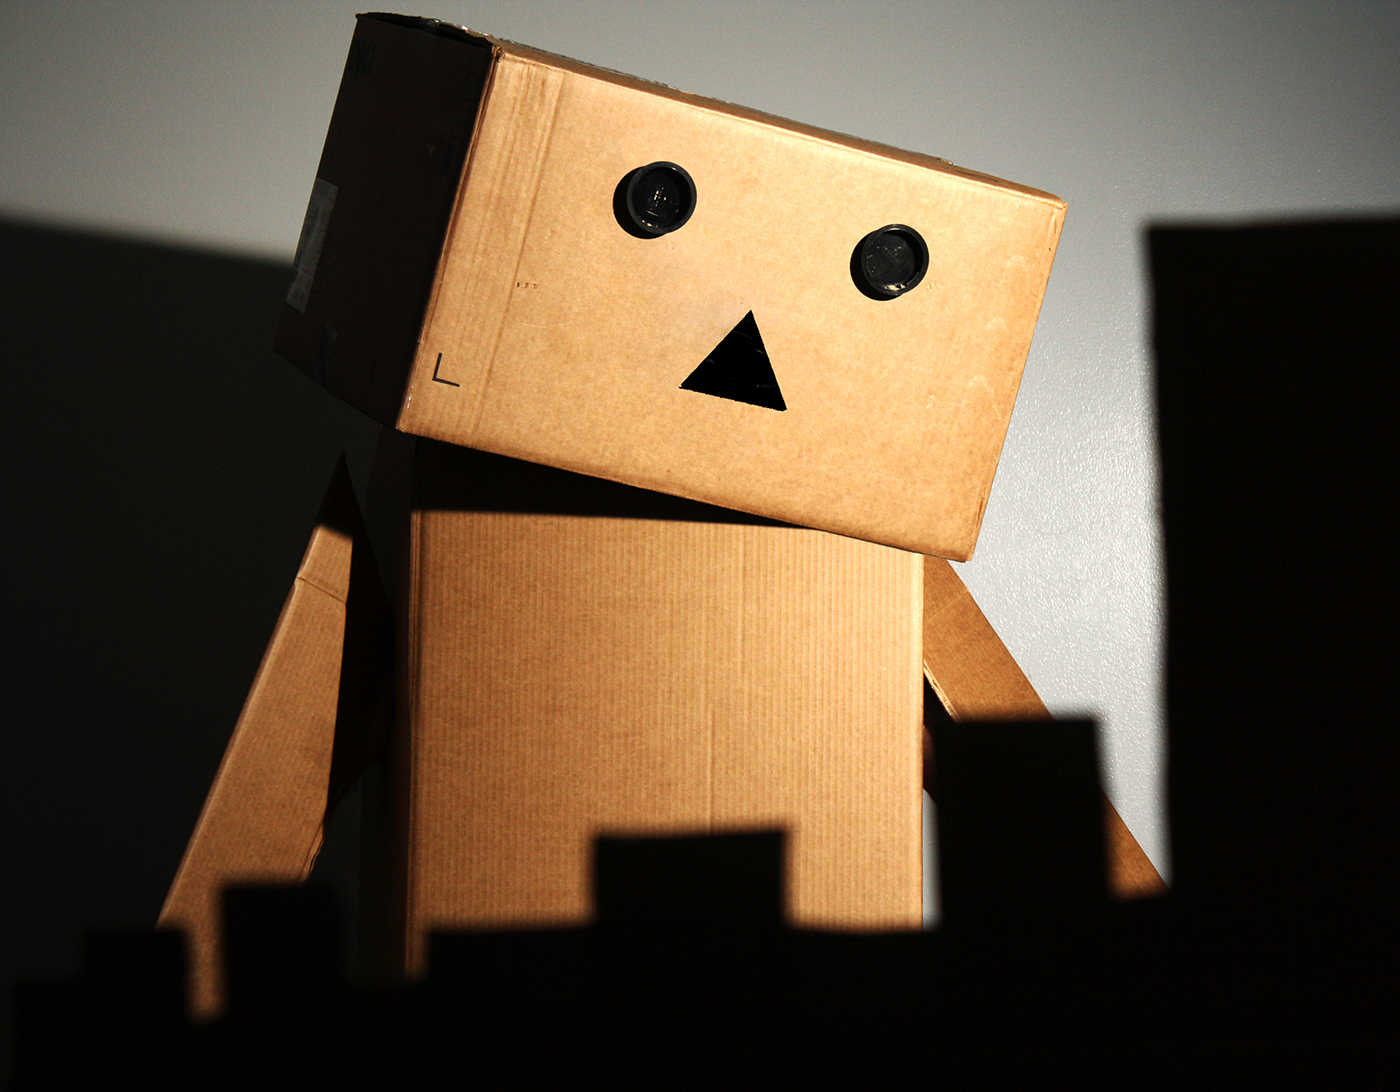 What's Wrong Danbo?